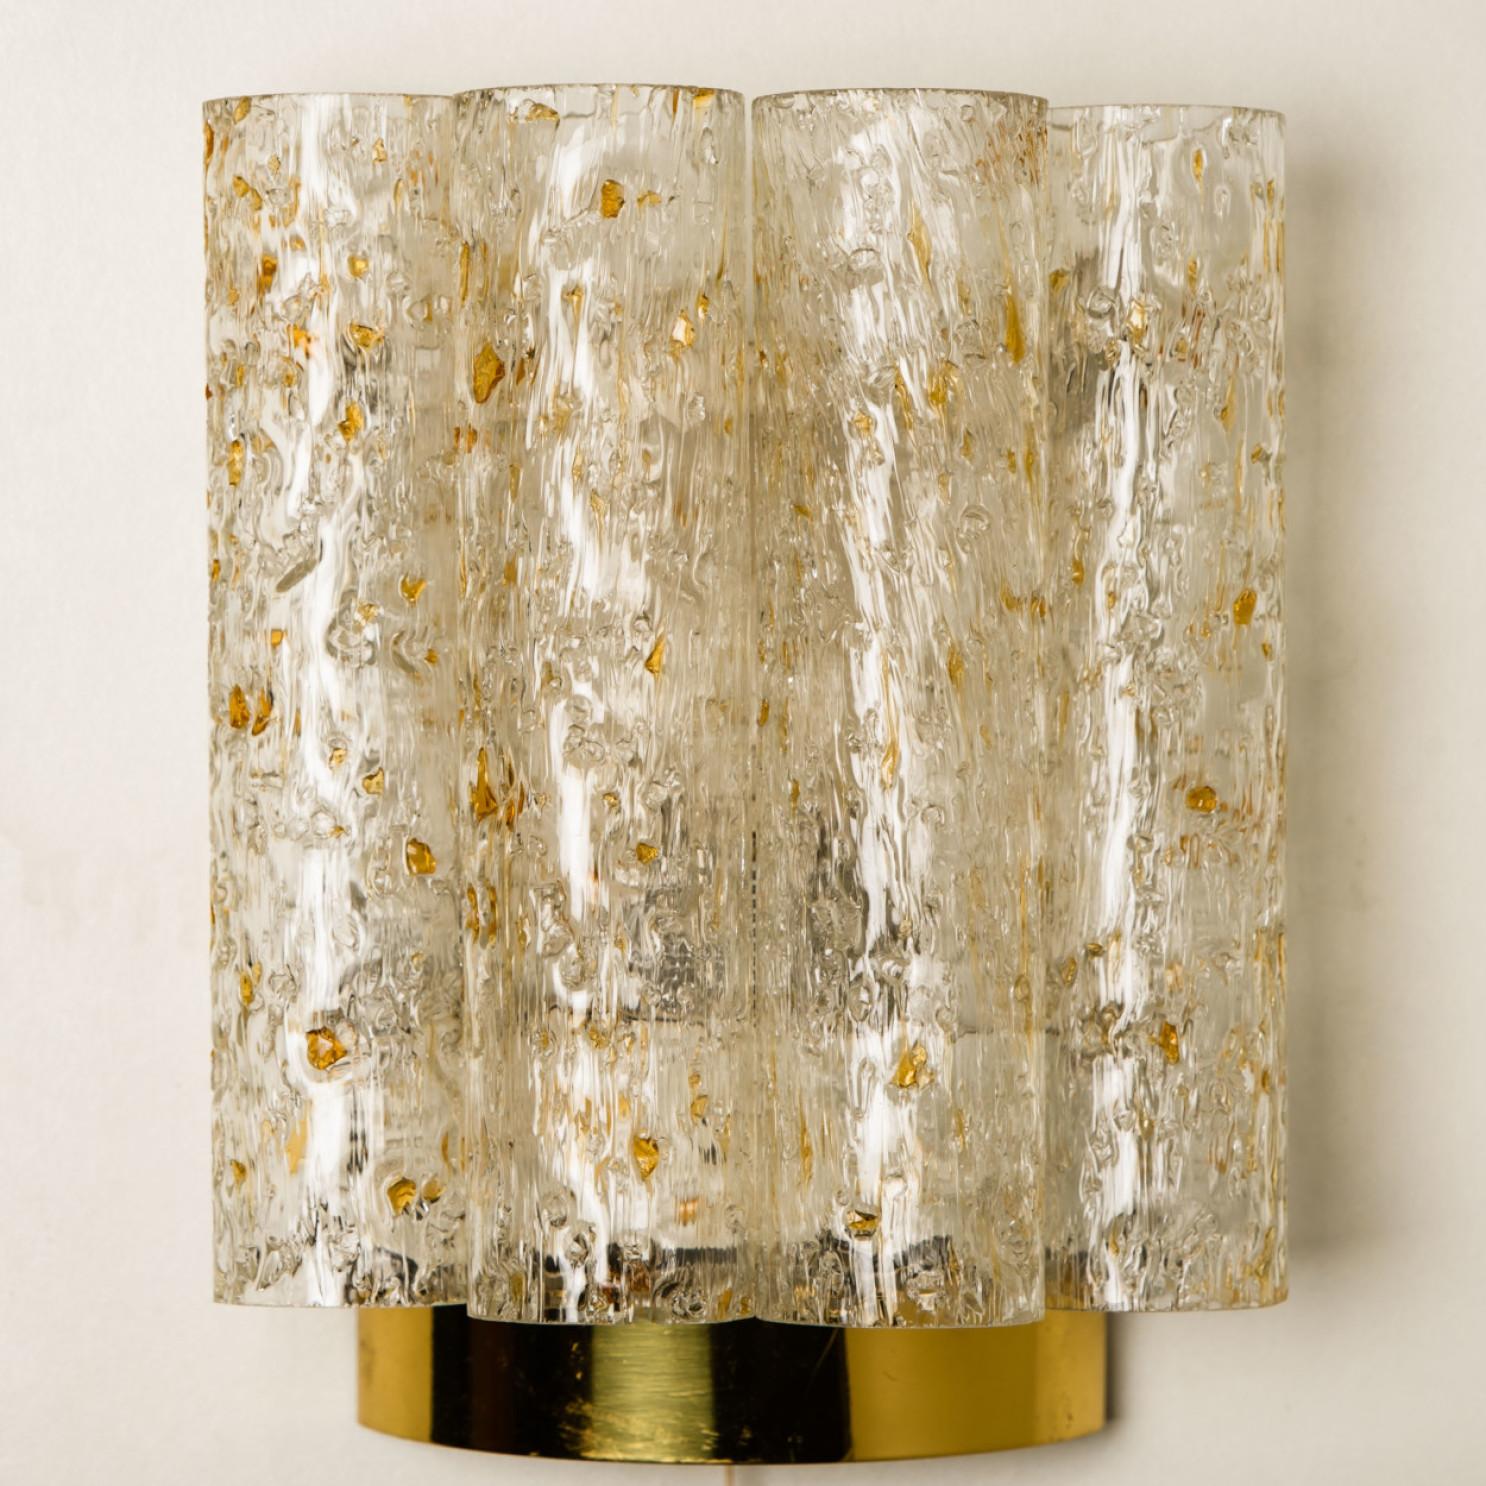 Other Speckled Tubes Wall Lights by Doria Leuchten, 1960s For Sale